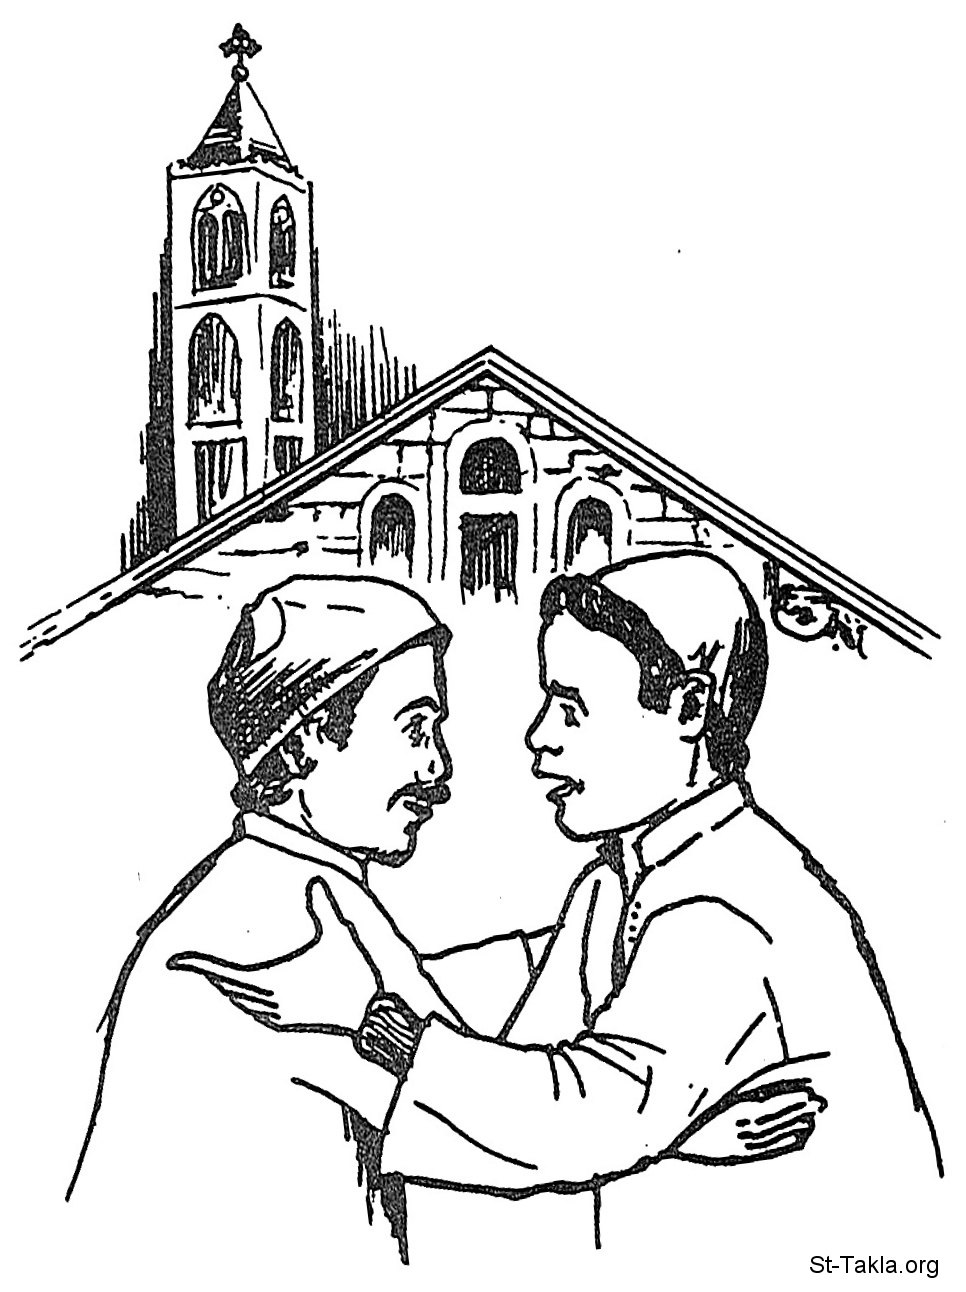 St-Takla.org Image: Two men hugging, friendship, in front of a Church - by Amgad Wadea     :    ɡ  -  .  